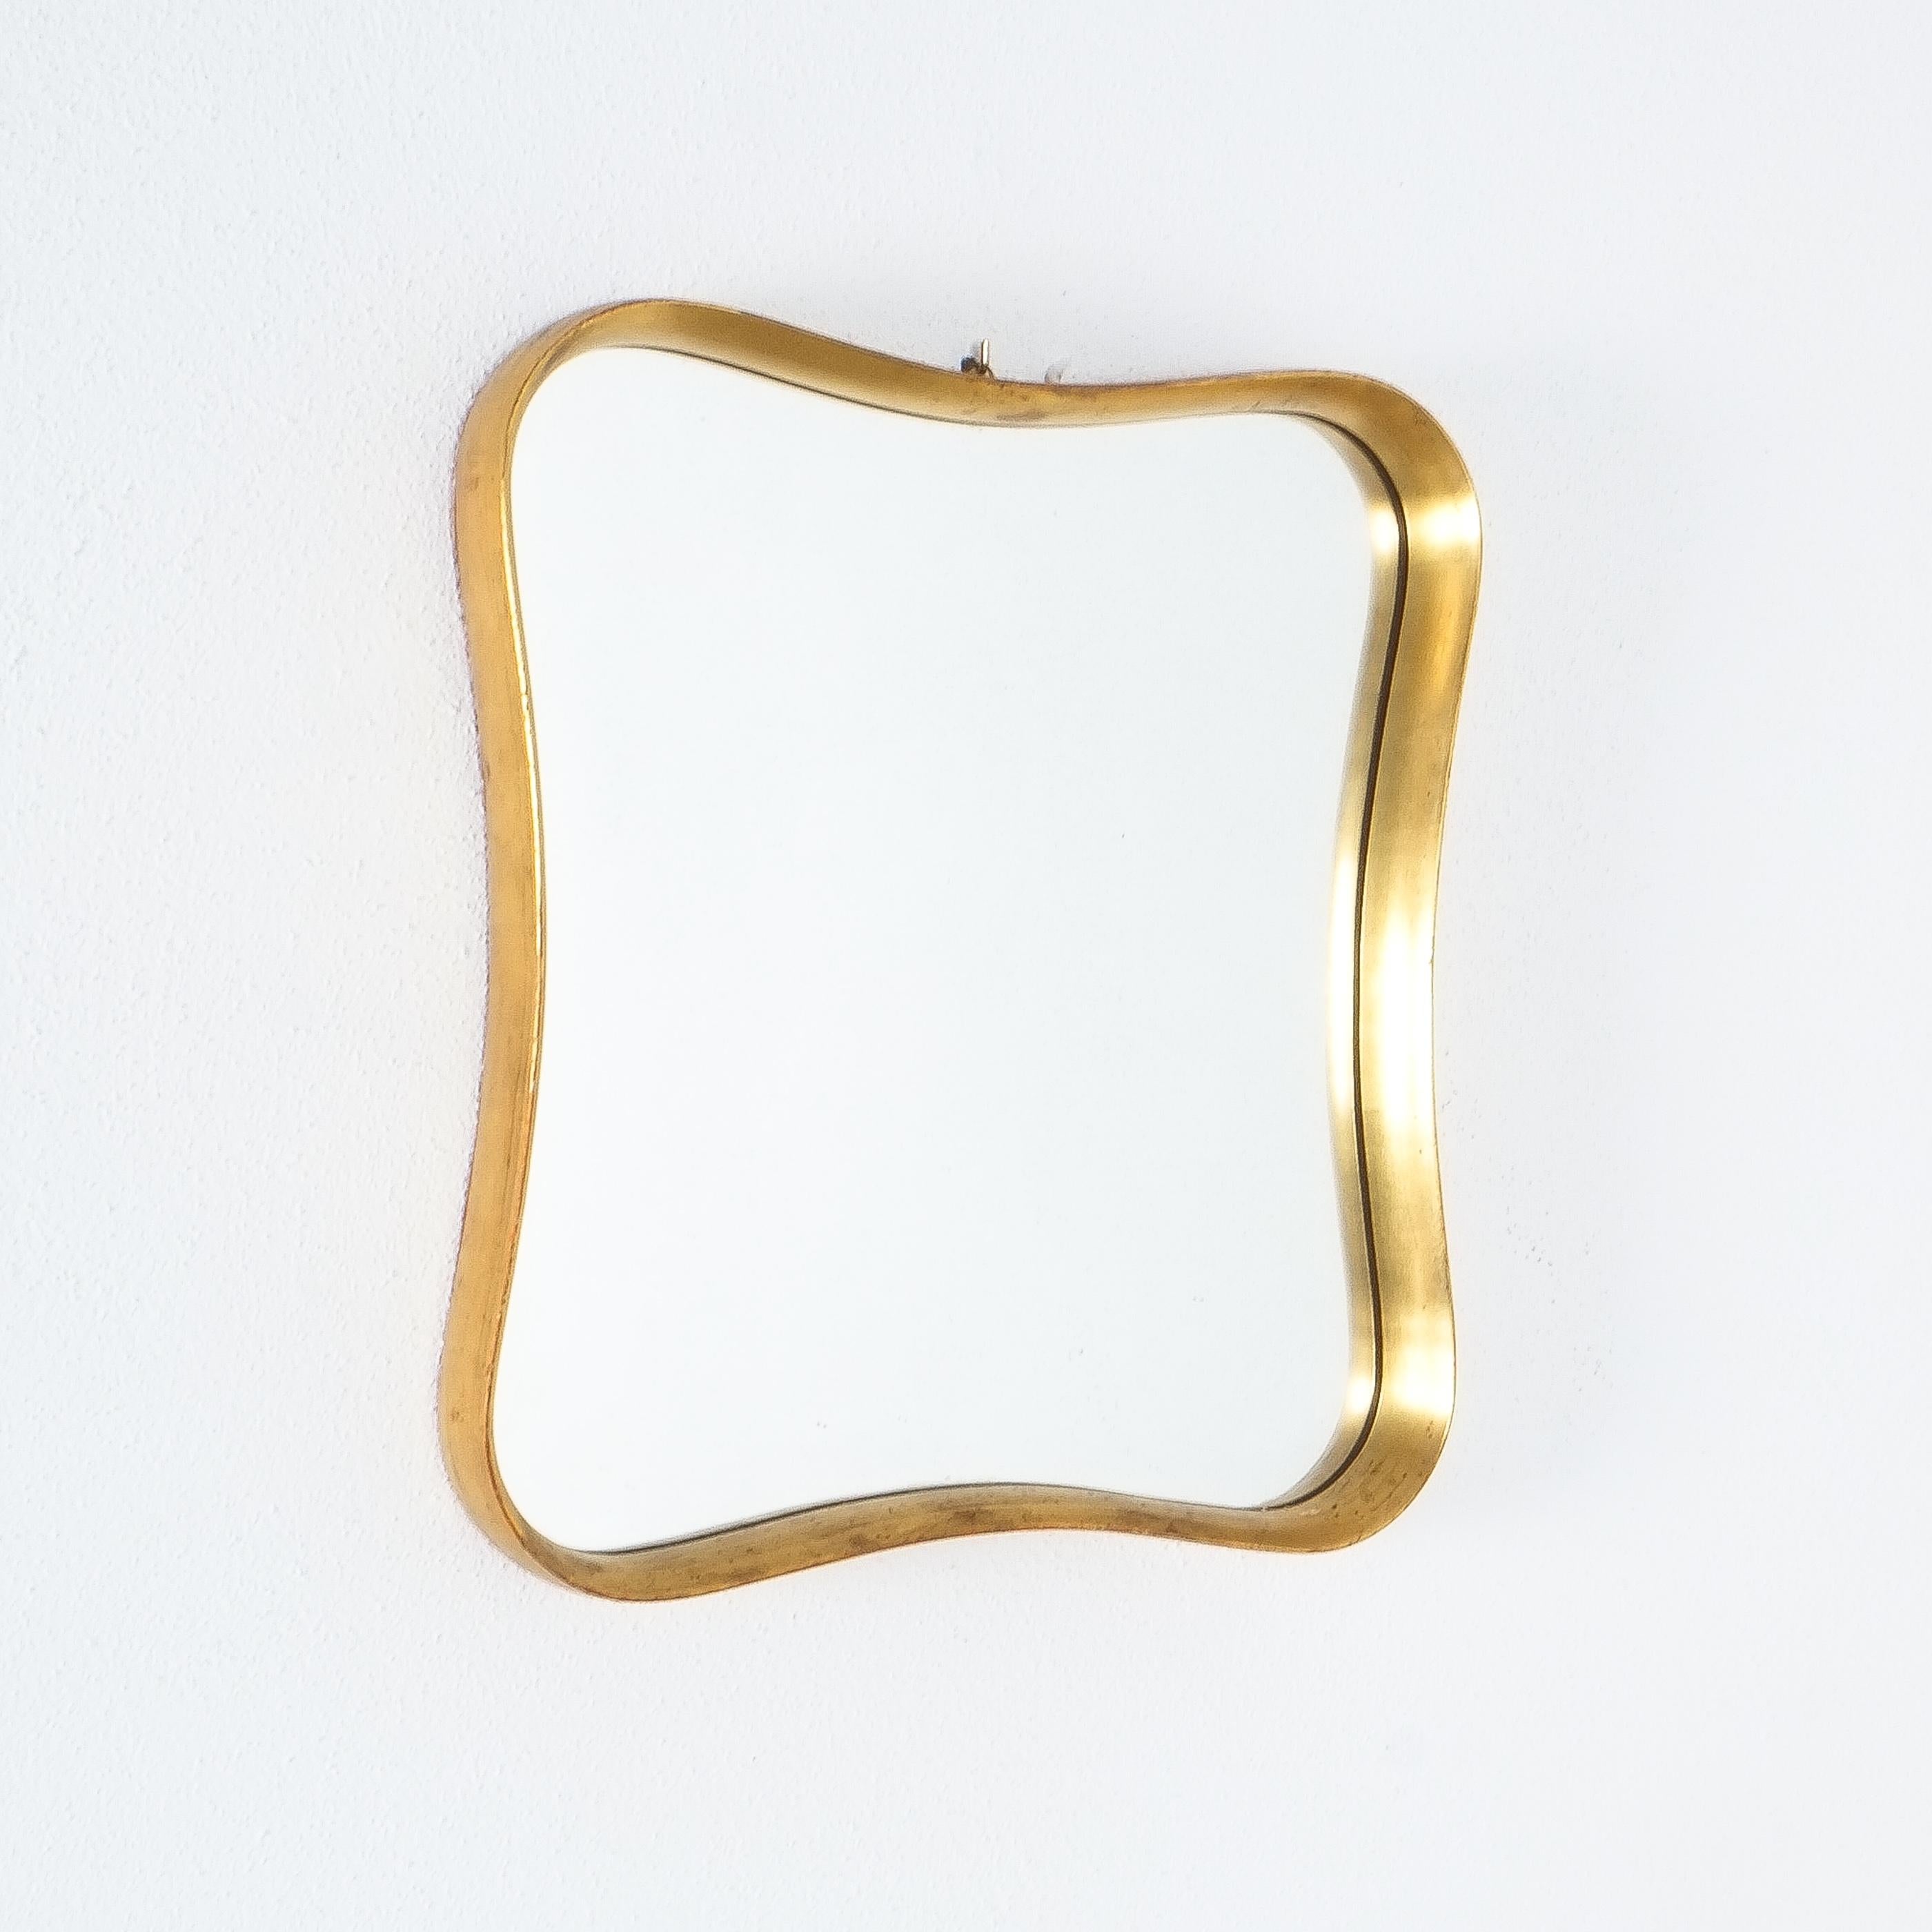 Classical bent wood, gold leaf mirror, France, circa 1950-1960

French mirror with an elegant bent wood and plaster frame, plated with gold leaf. It's in good condition with normal wear to the frame and mirror glass. The gold leaf plating shows